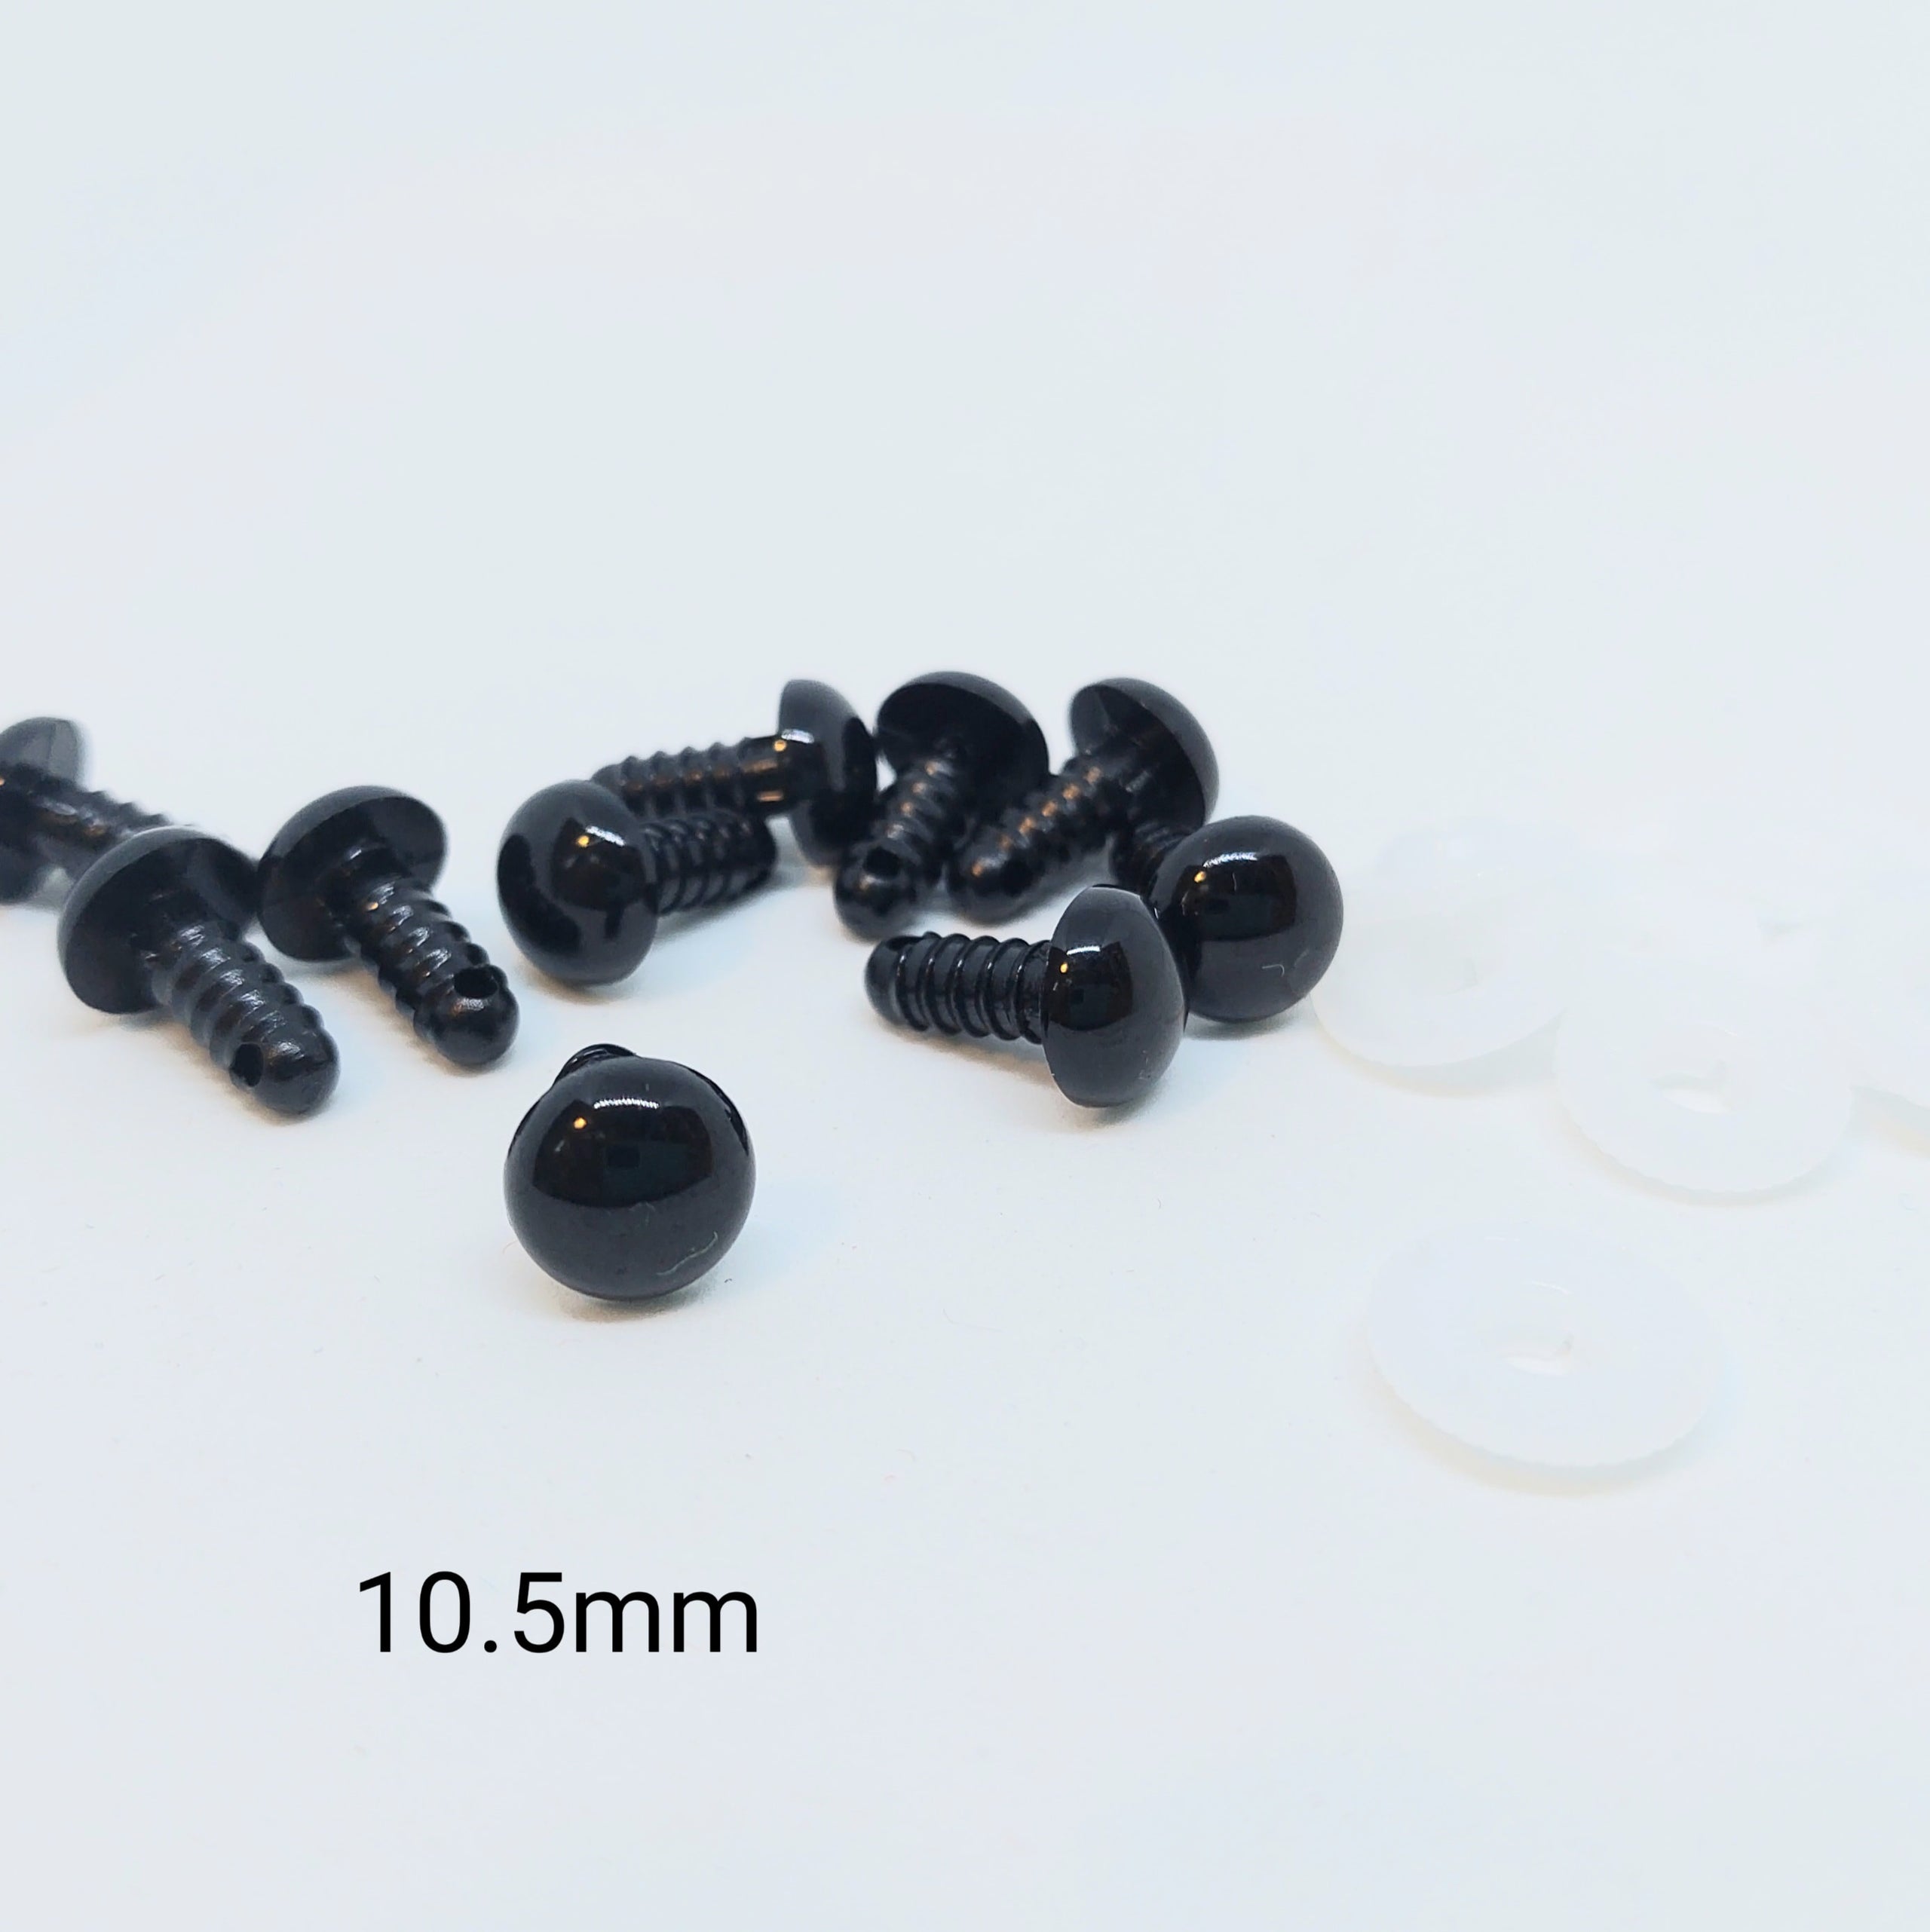 Buy SAFETY EYES BLACK 10MM From OTHER Online